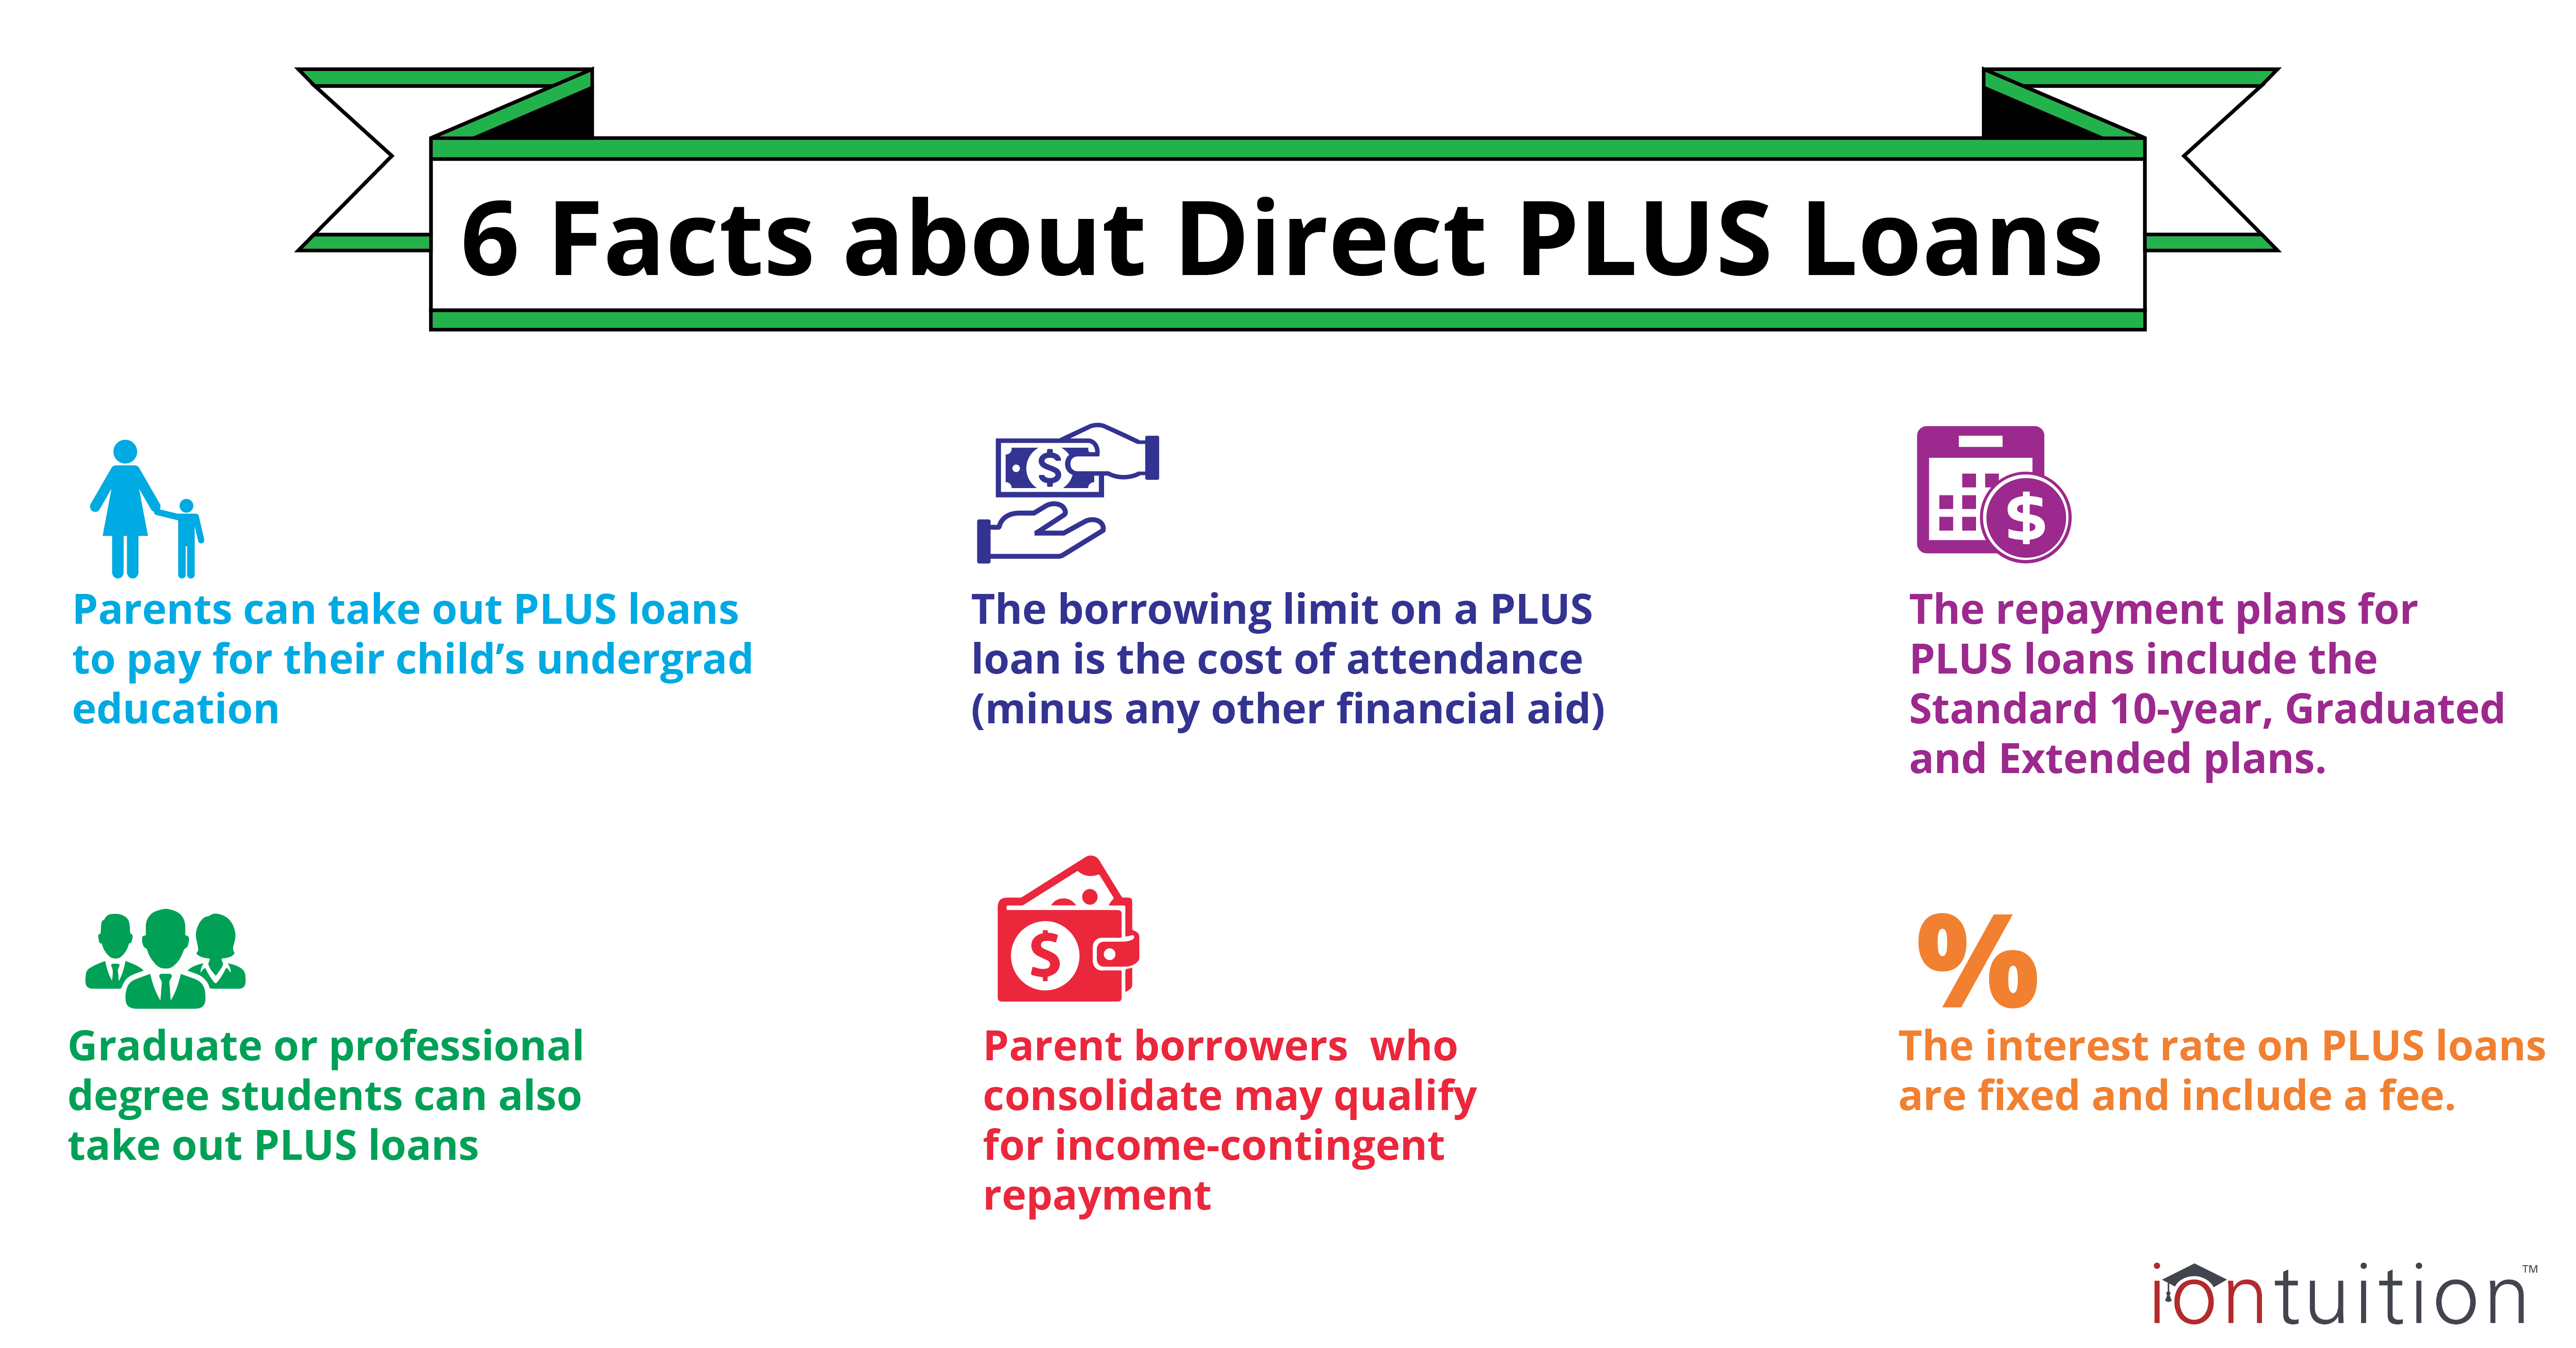 Facts about Direct PLUS Loans